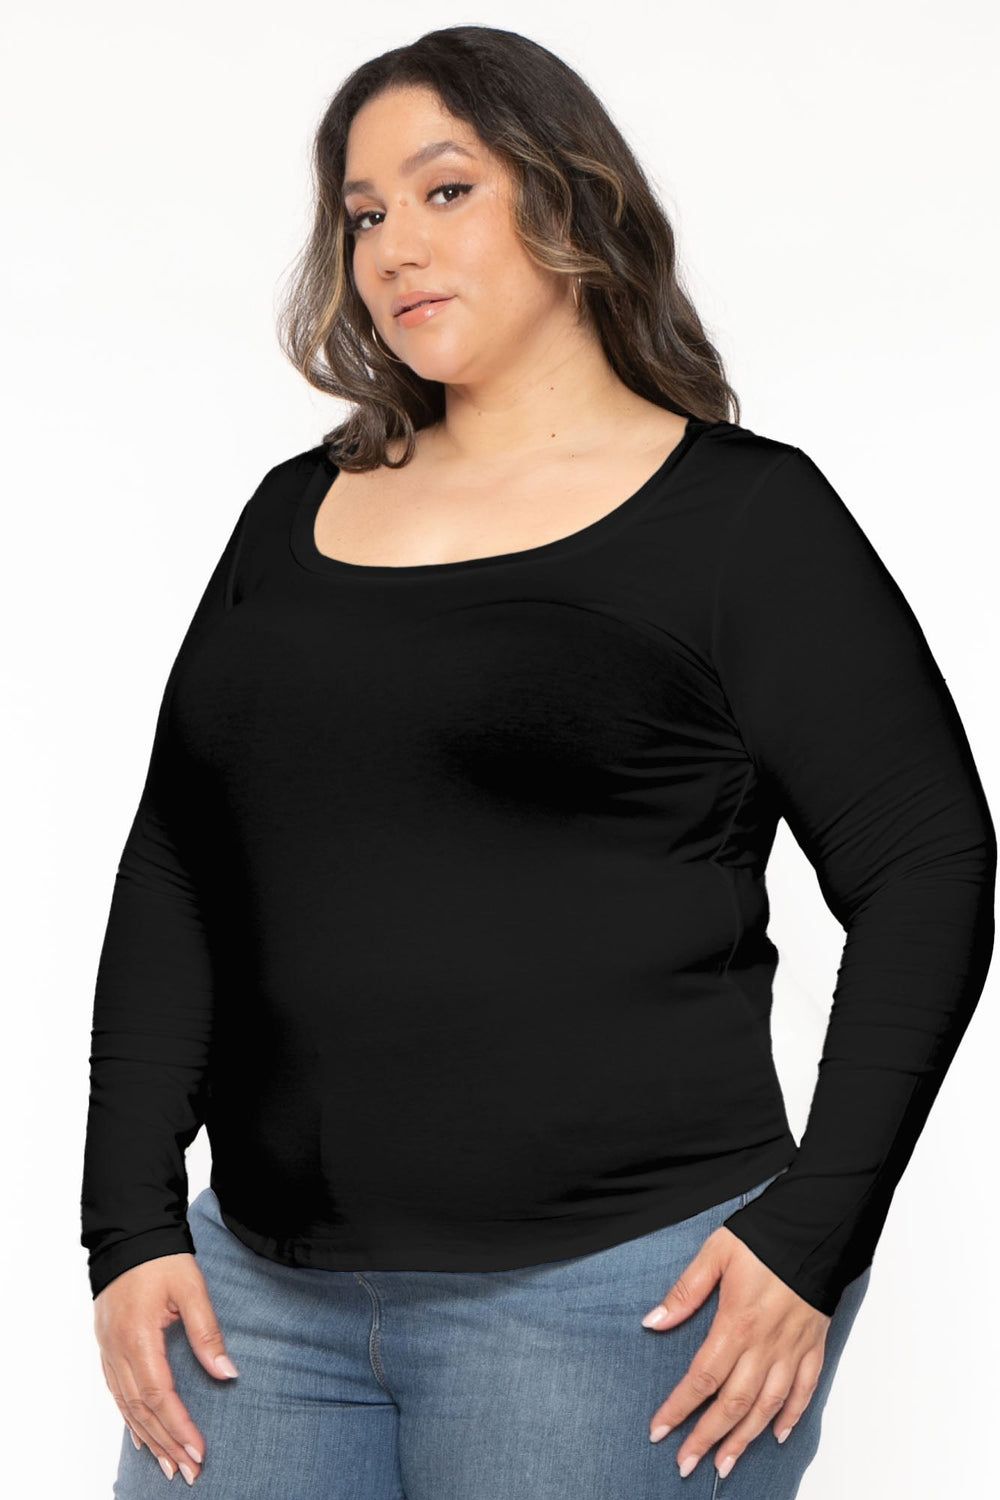 CULTURE CODE Tops Plus Size Aime  Long Sleeve Top - Ivory